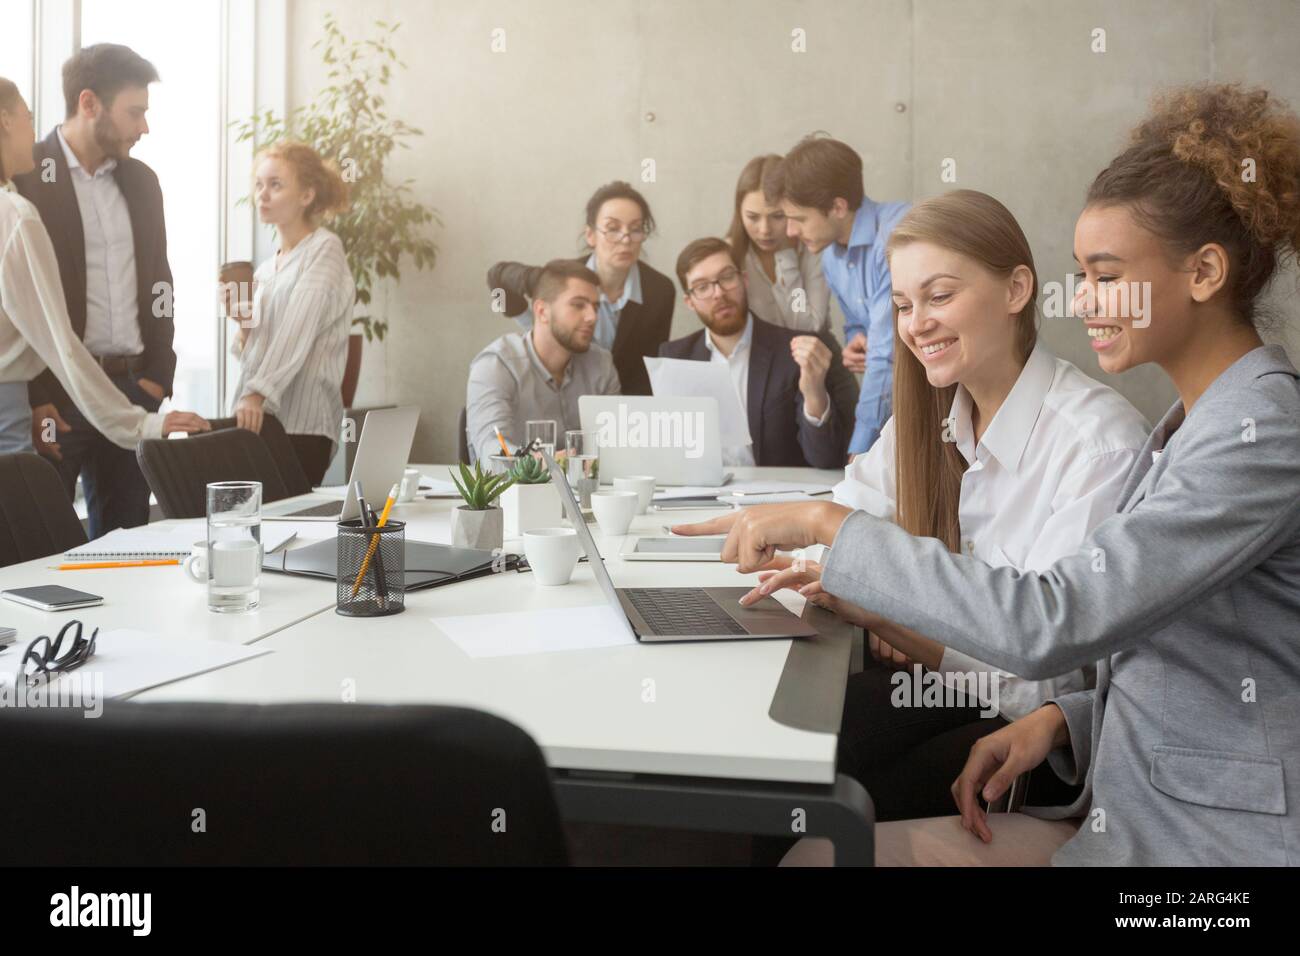 Groups of colleagues having break at meeting, using gadgets Stock Photo